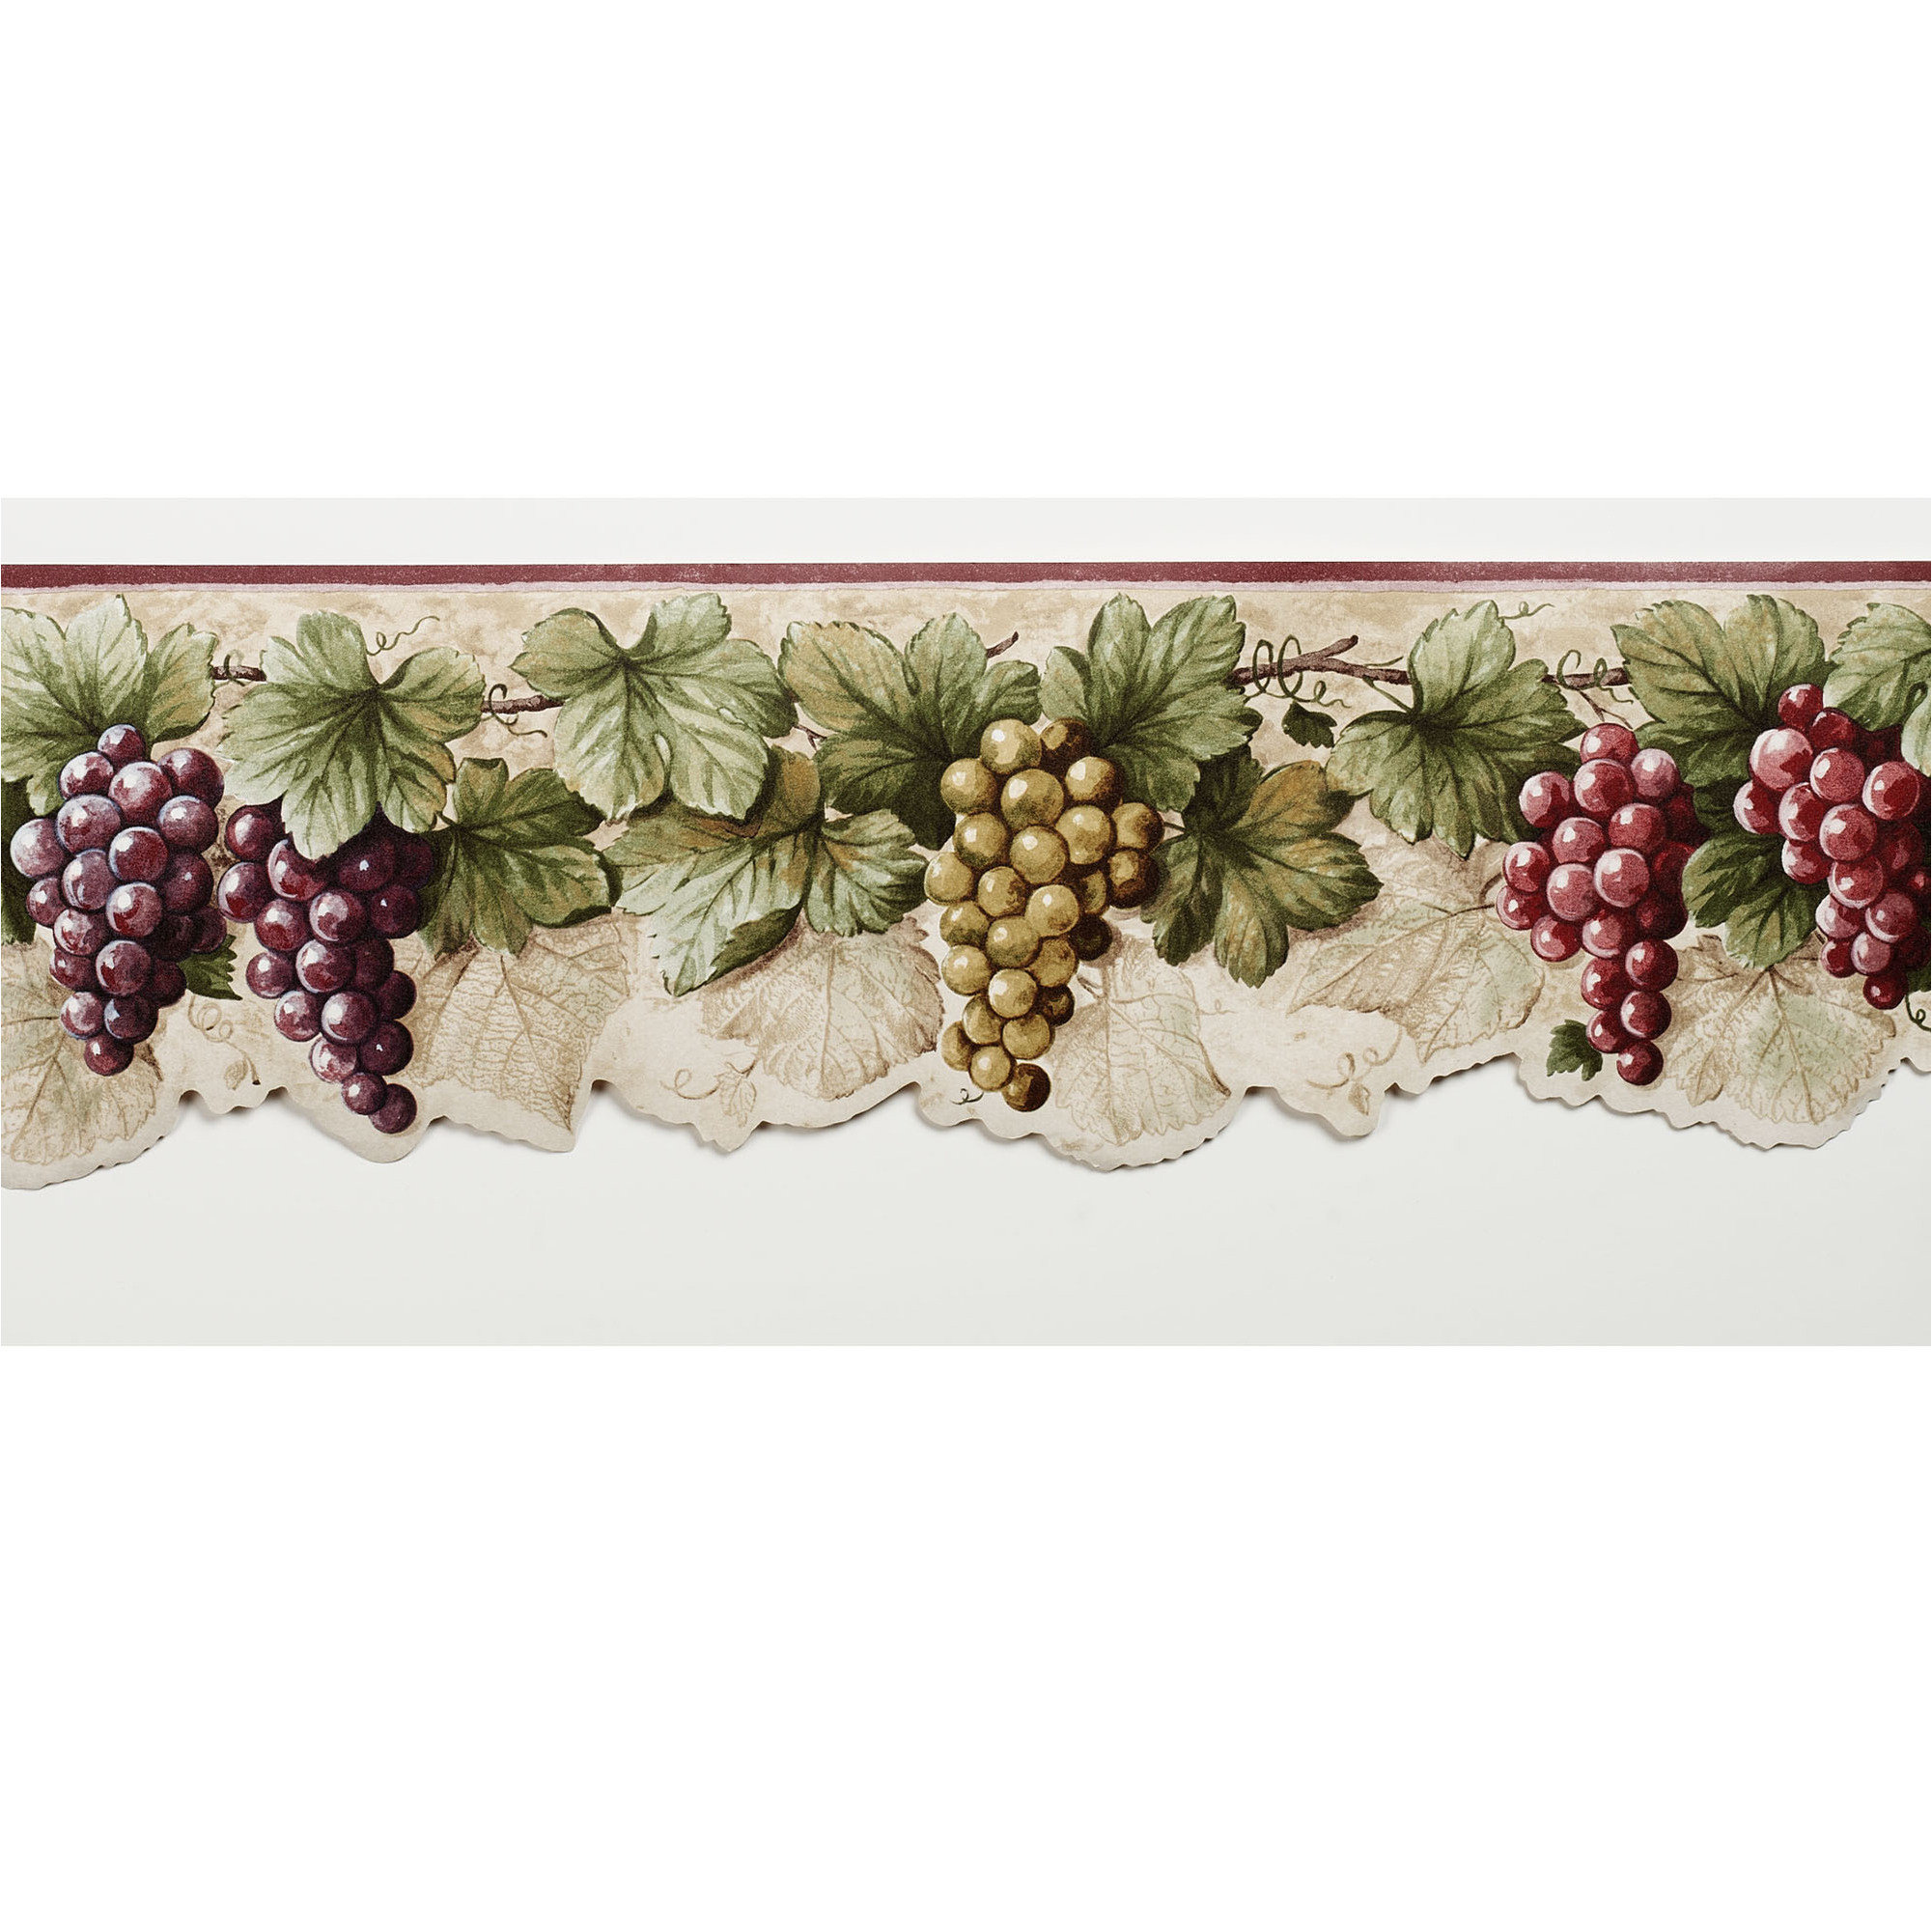 Roses and Grapes in Baskets Die-Cut Wallpaper Border  WD76825DC